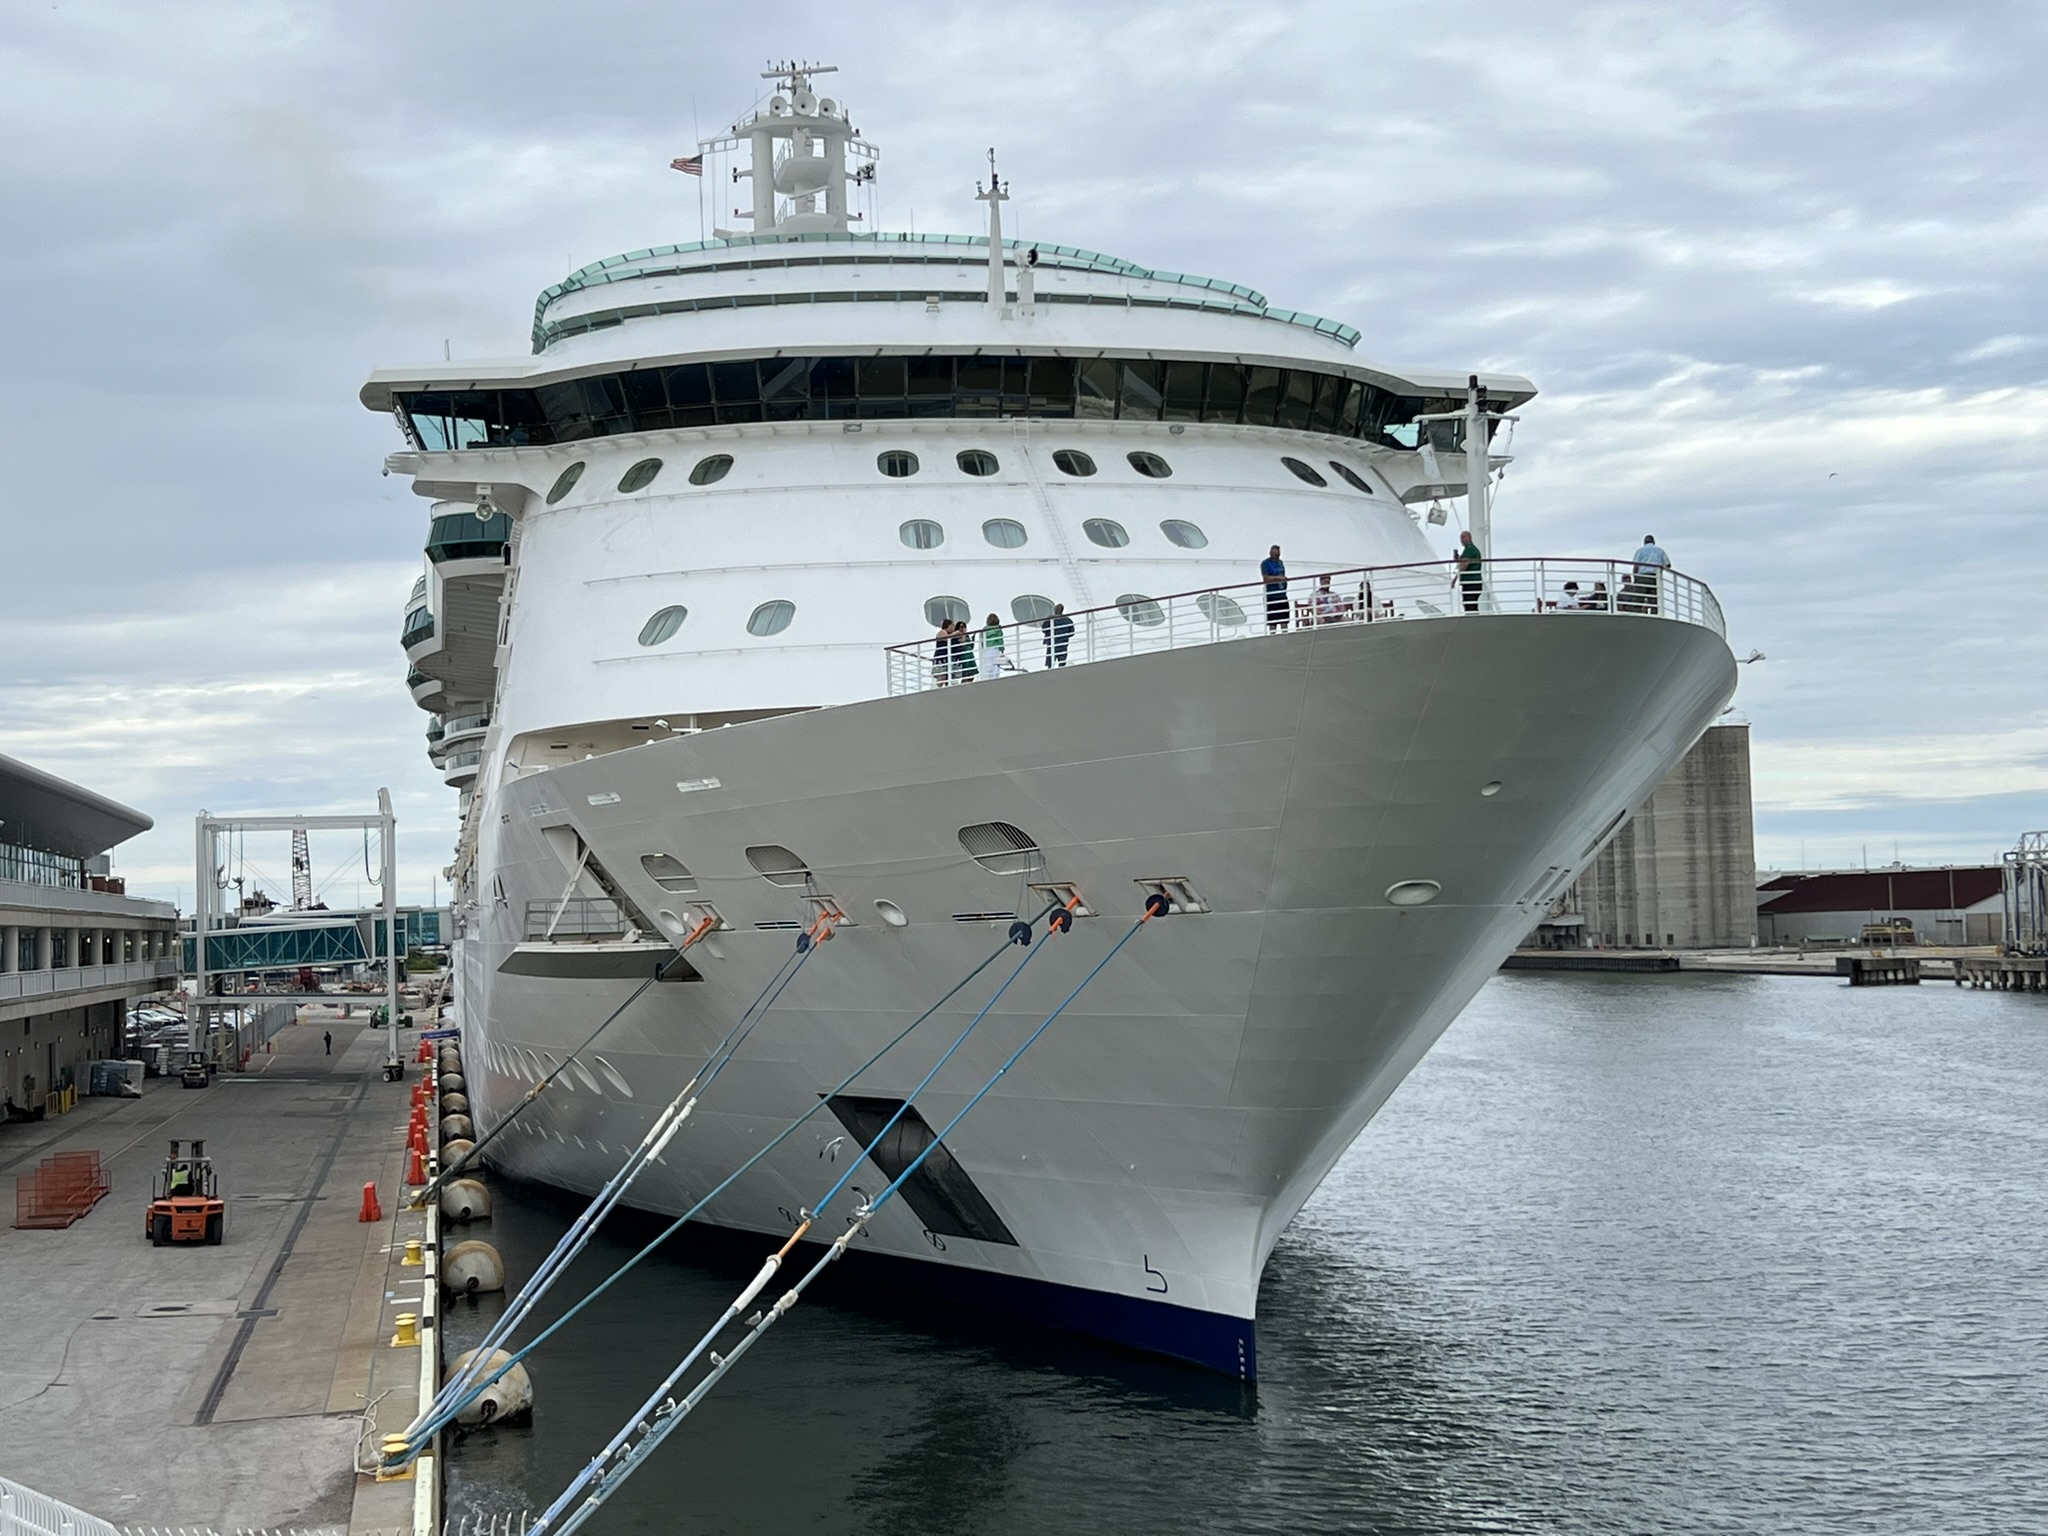 Cruise Ships – Royal Caribbean’s Cruise Ship Radiance of the Seas Leaves the Port of Tampa